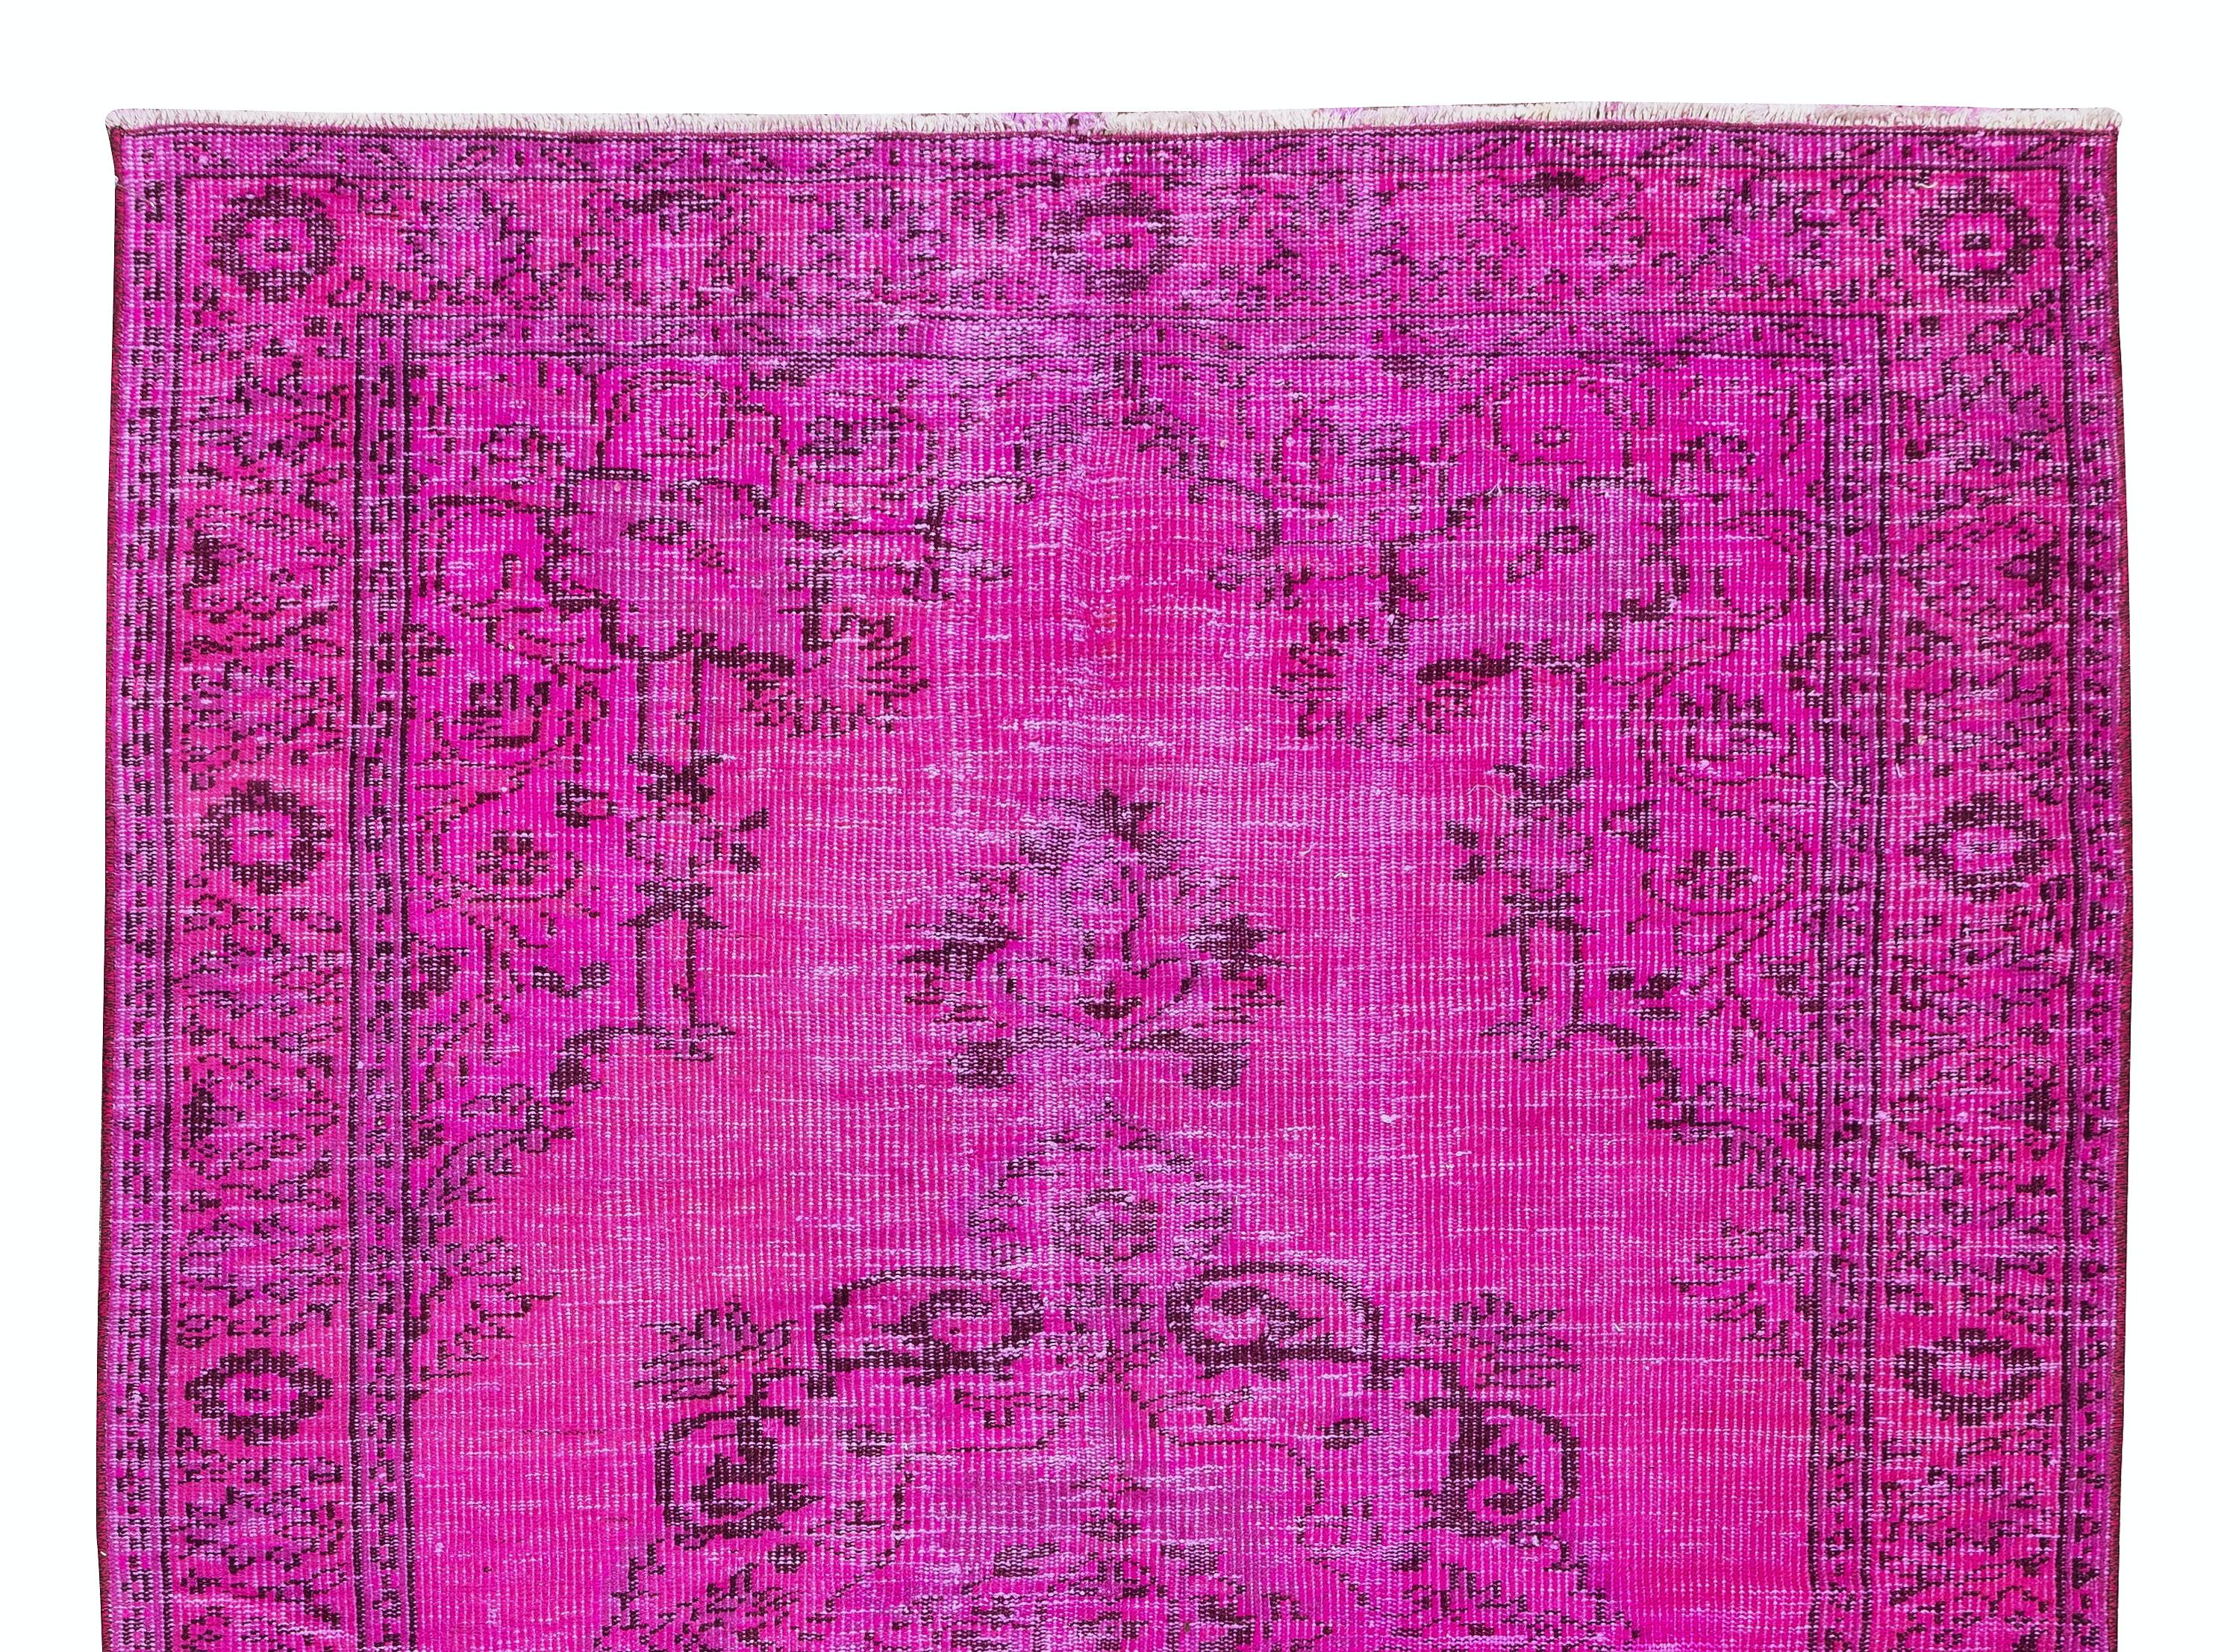 Hand-Knotted 5x7.8 Ft Handmade Turkish Carpet, Fuchsia Pink Area Rug, Woolen Floor Covering For Sale